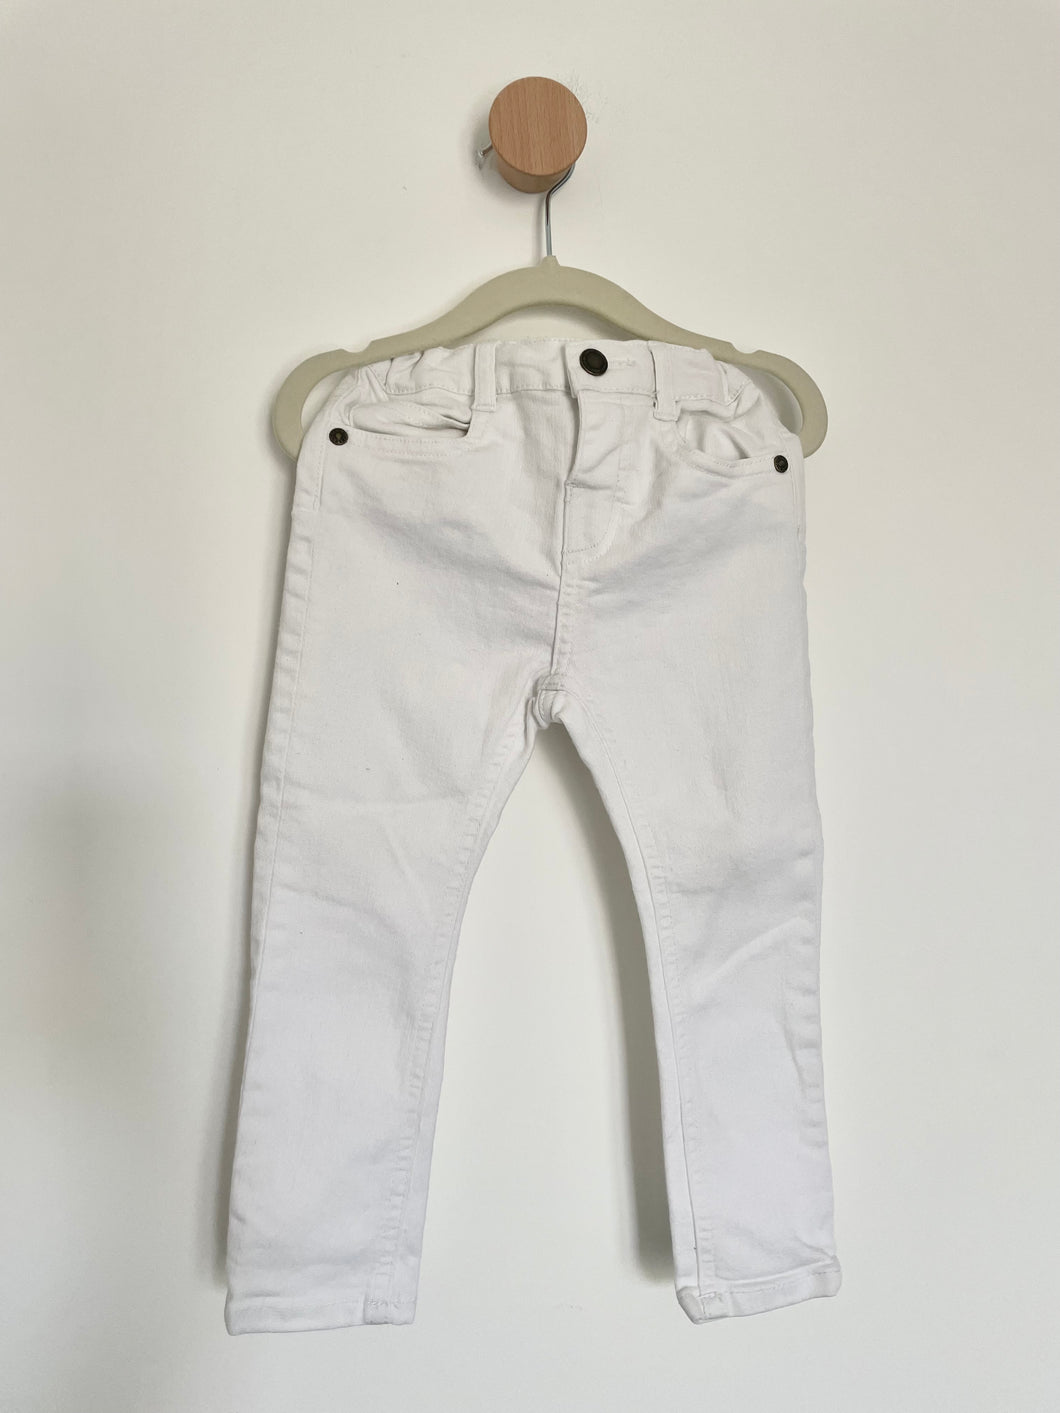 18-24m Trousers